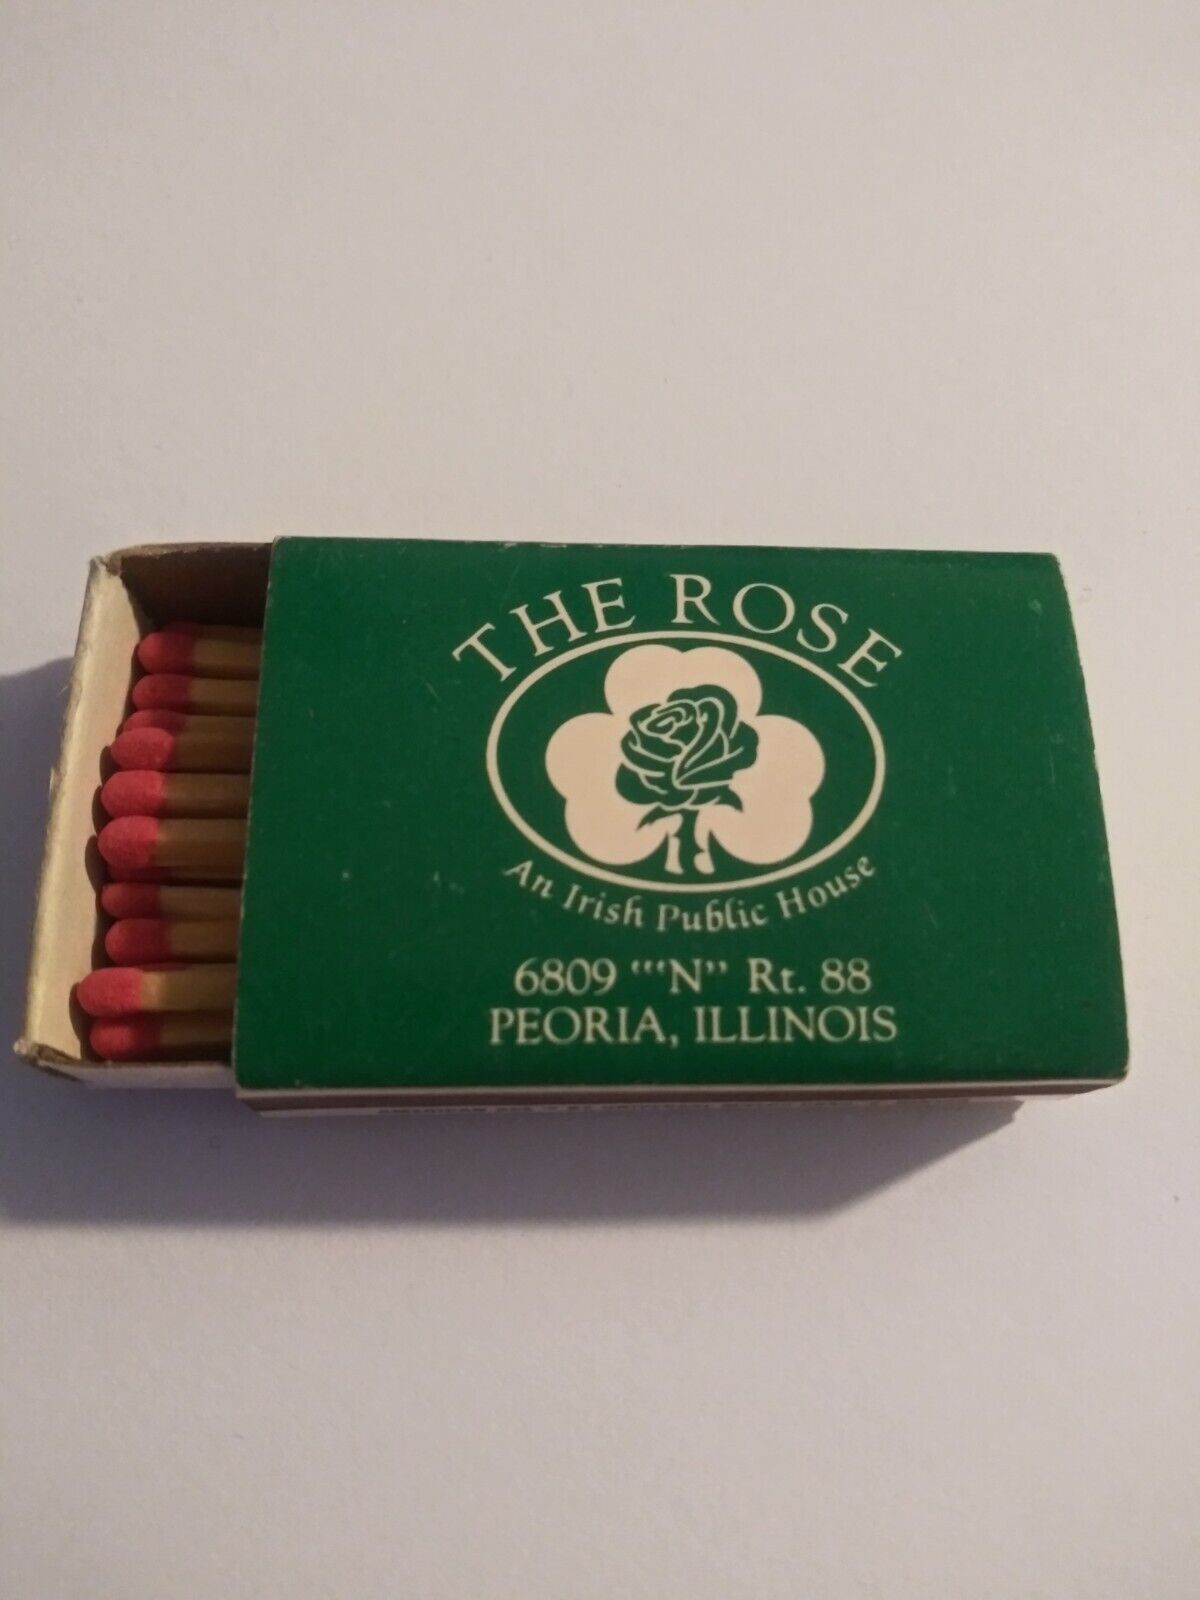 Vintage Wooden Matches From The Rose An Irish Public House Peoria Illinois